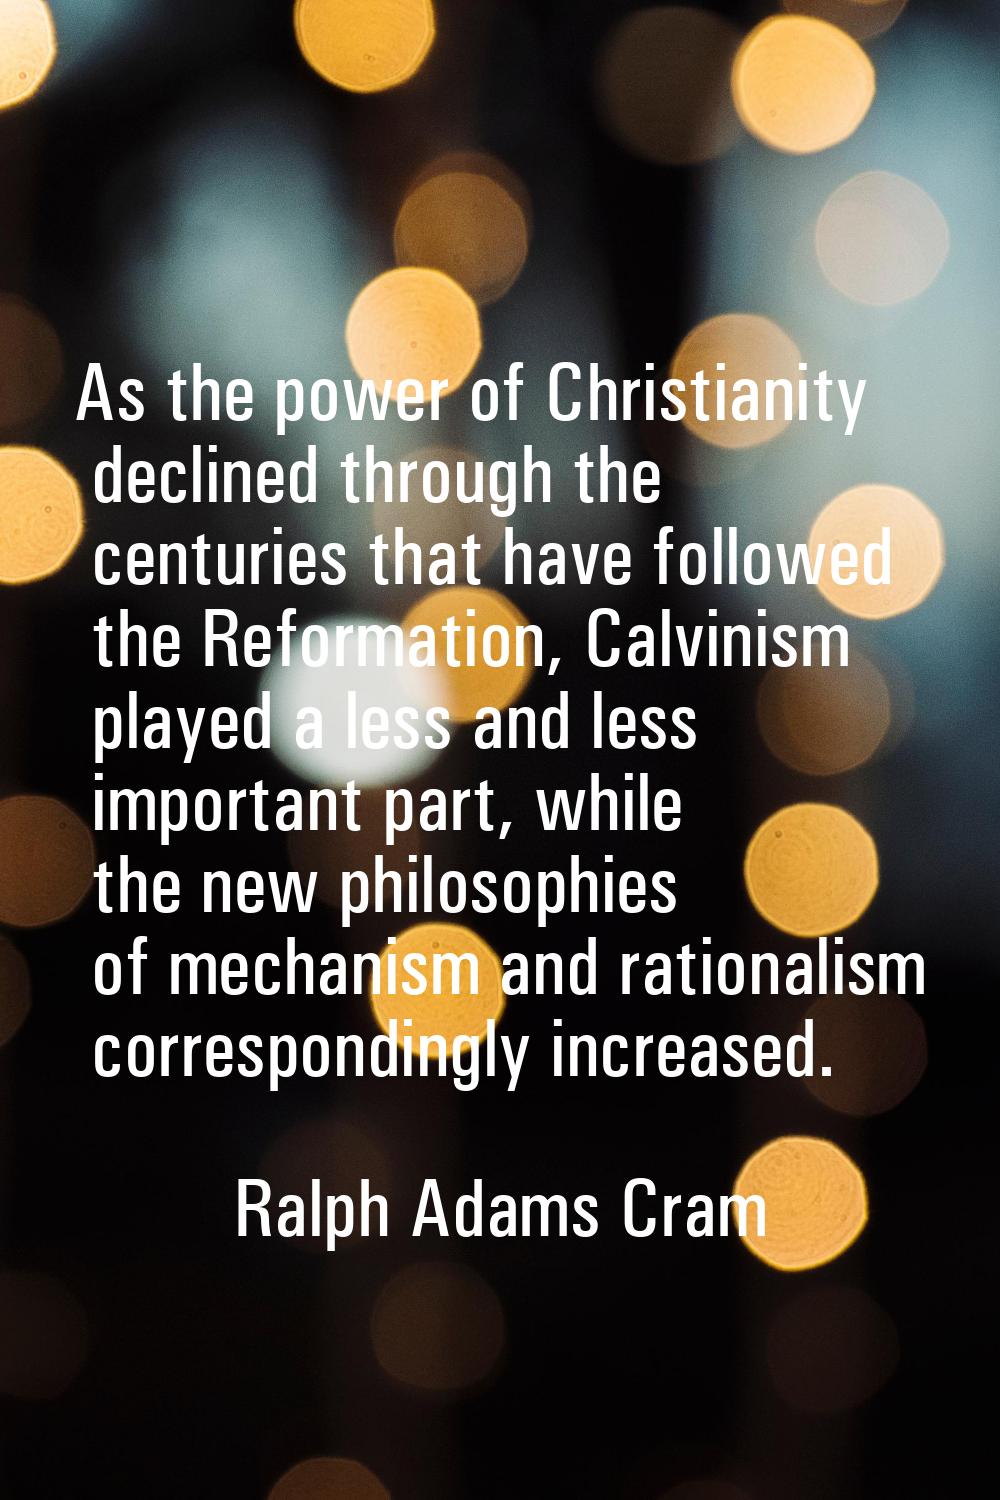 As the power of Christianity declined through the centuries that have followed the Reformation, Cal